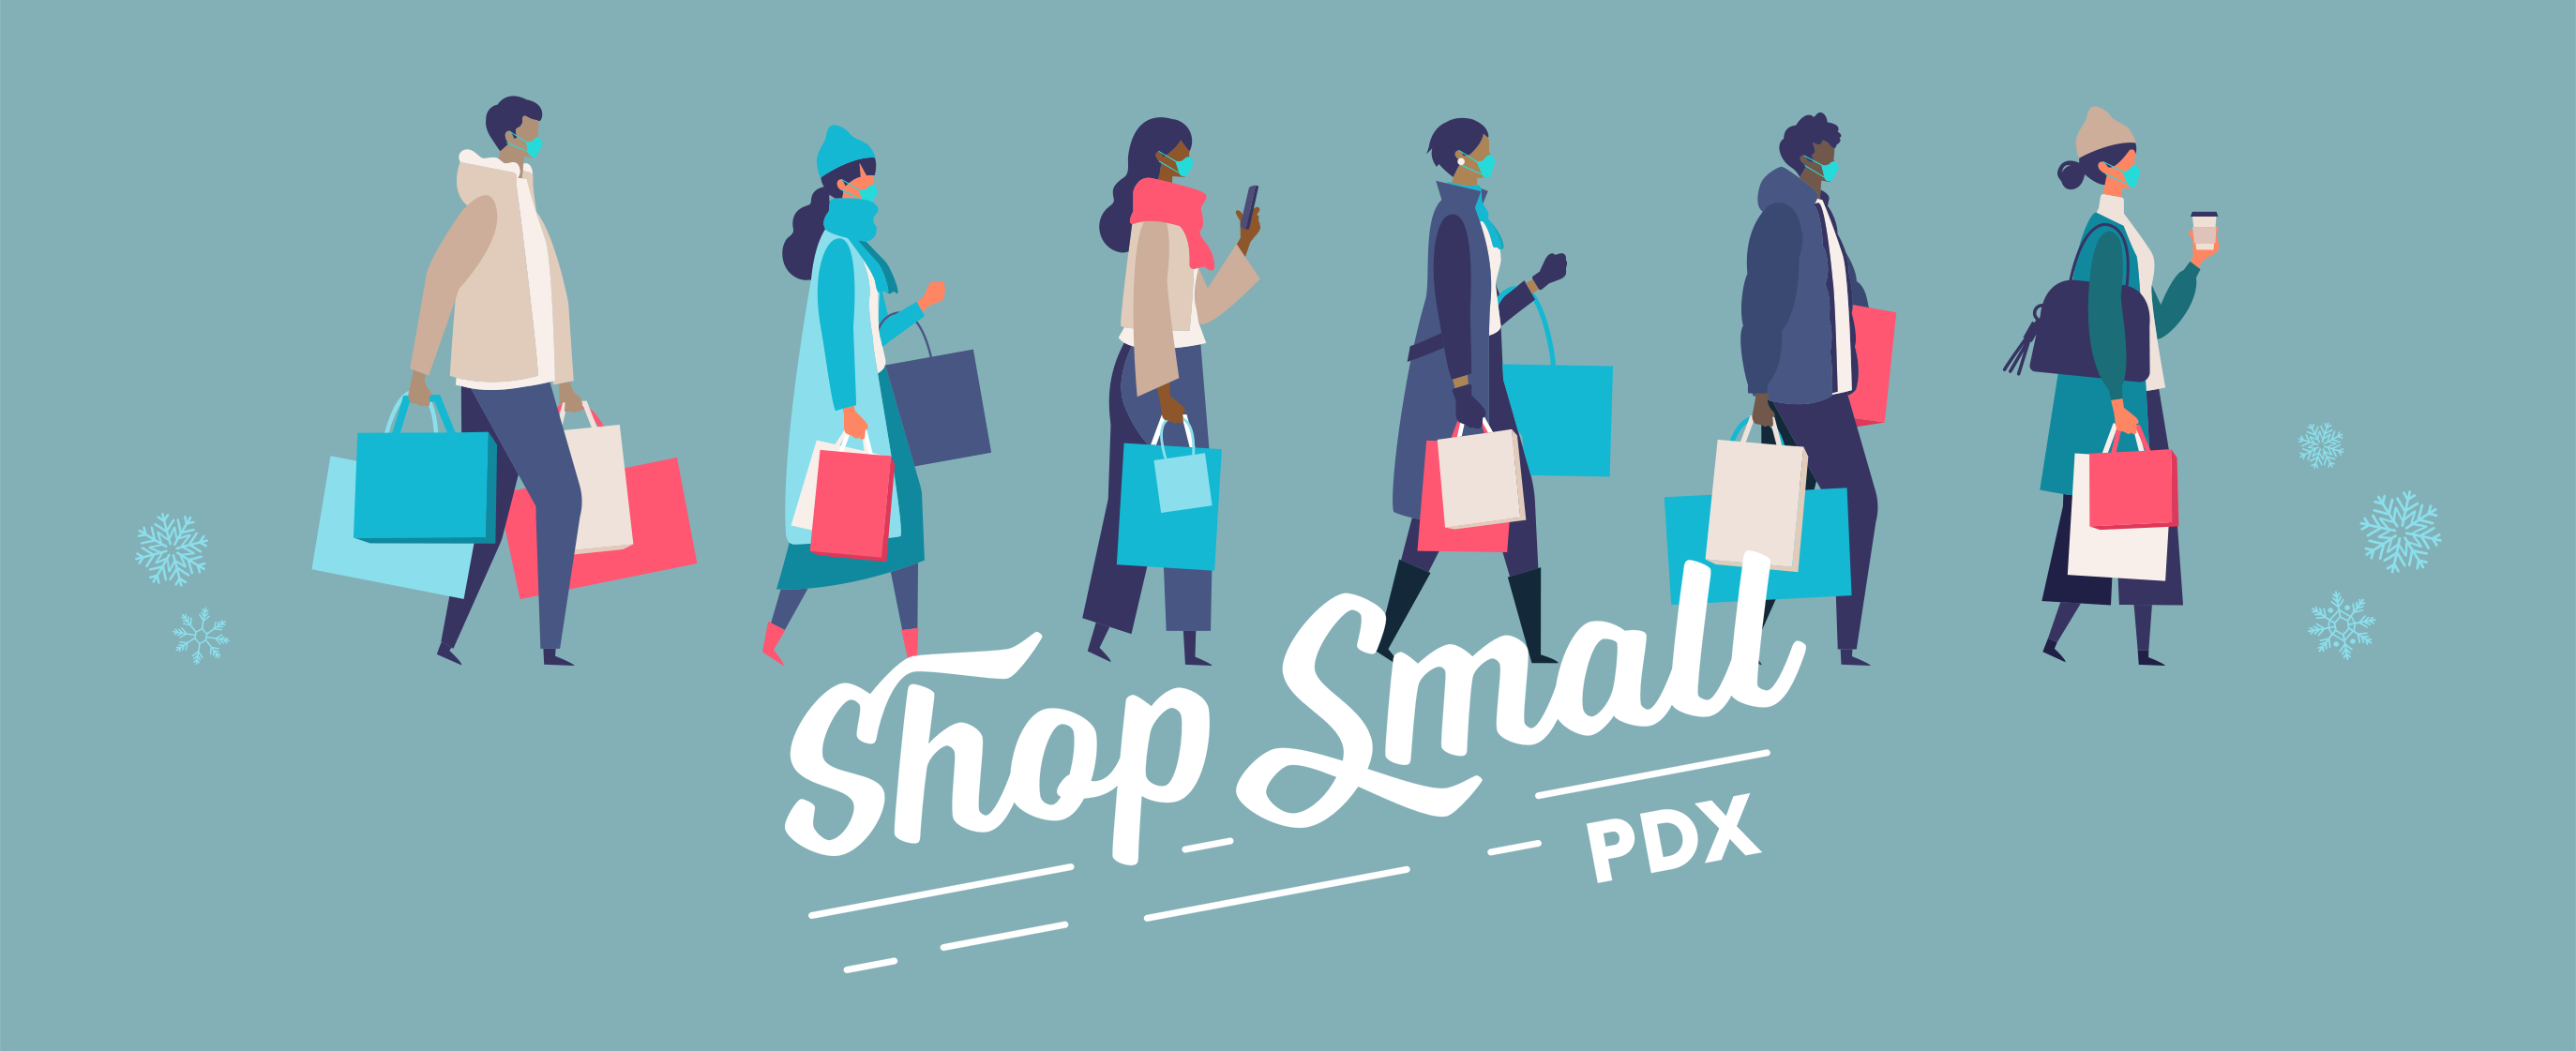 Shop Small PDX